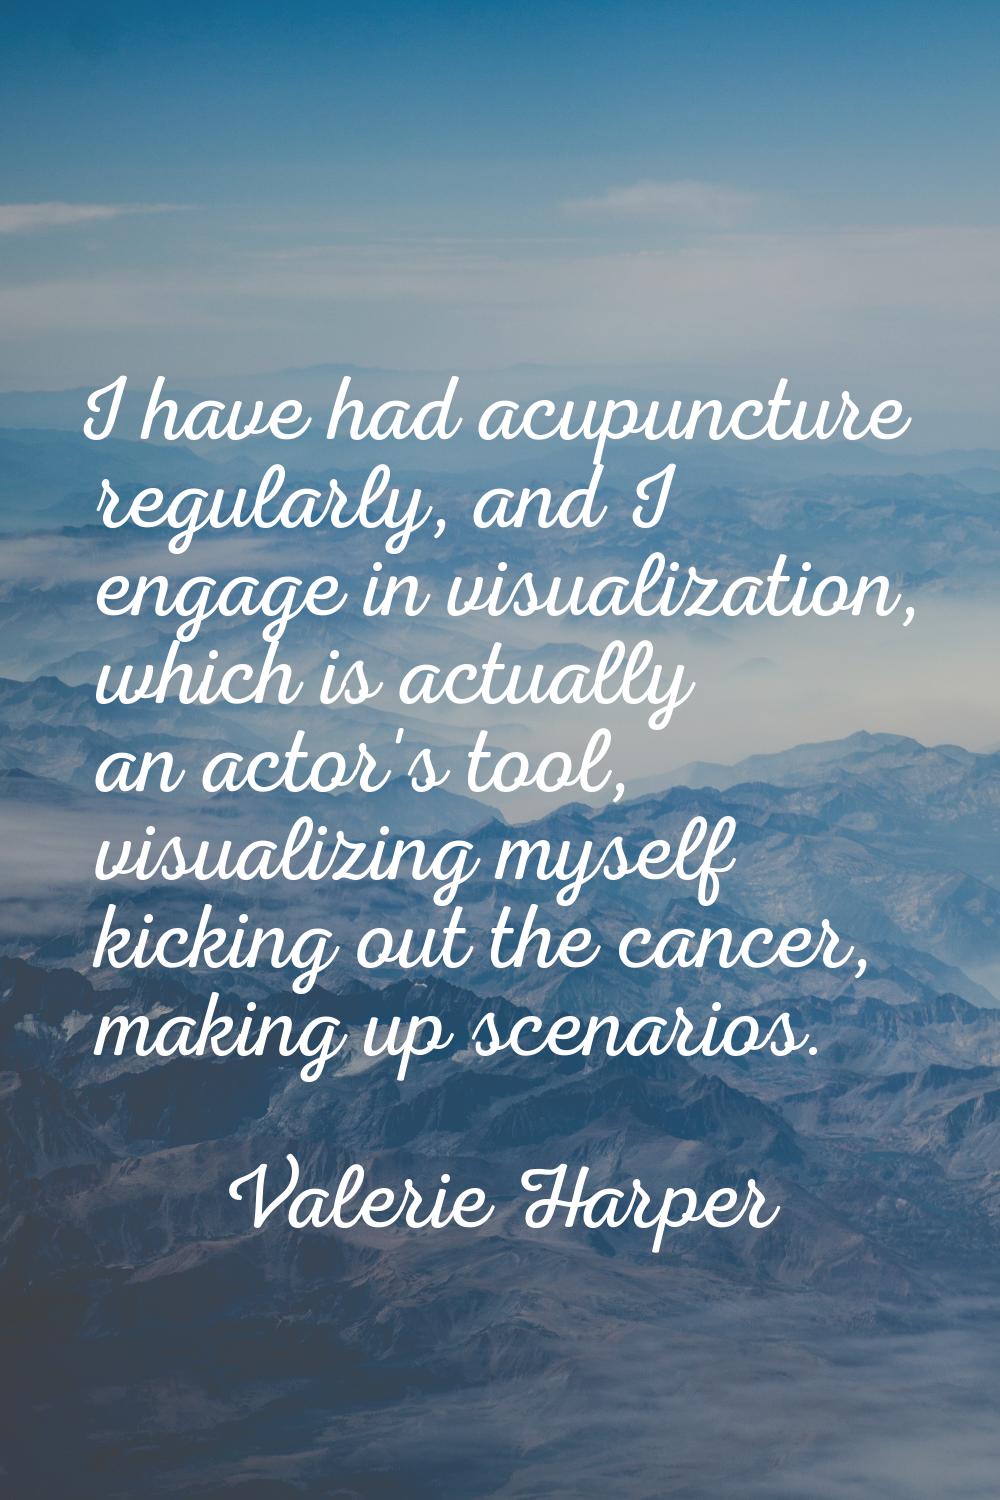 I have had acupuncture regularly, and I engage in visualization, which is actually an actor's tool,